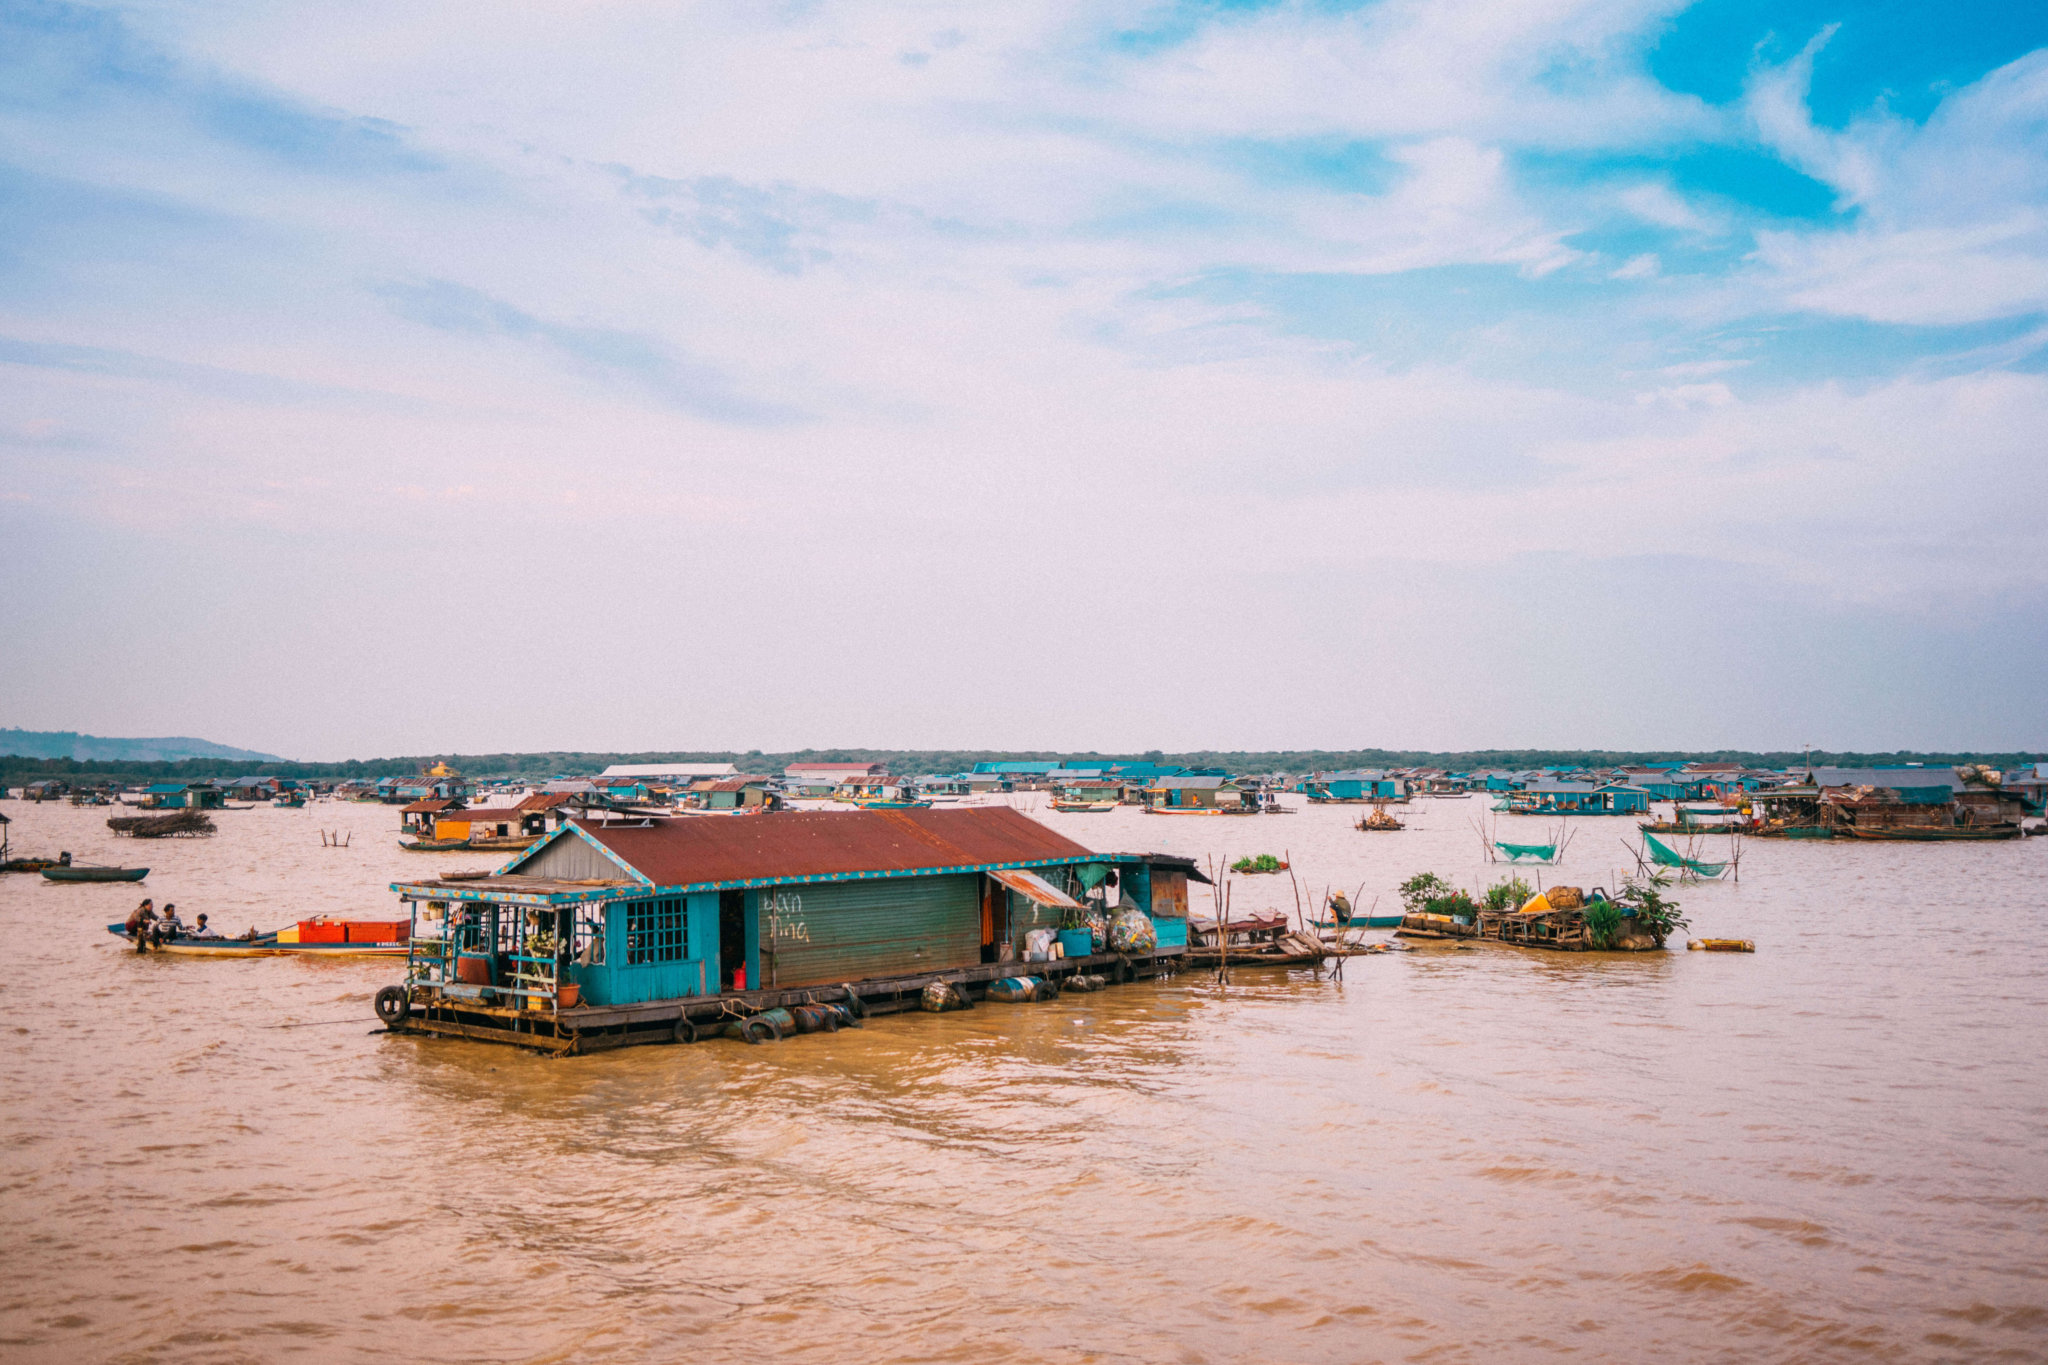 Floating Village of Chong Khneas, Chong Kneas, Floating Village, Siem Reap, Tonle Sap Lake, Cambodia, floating houses, house boat, southeast asia